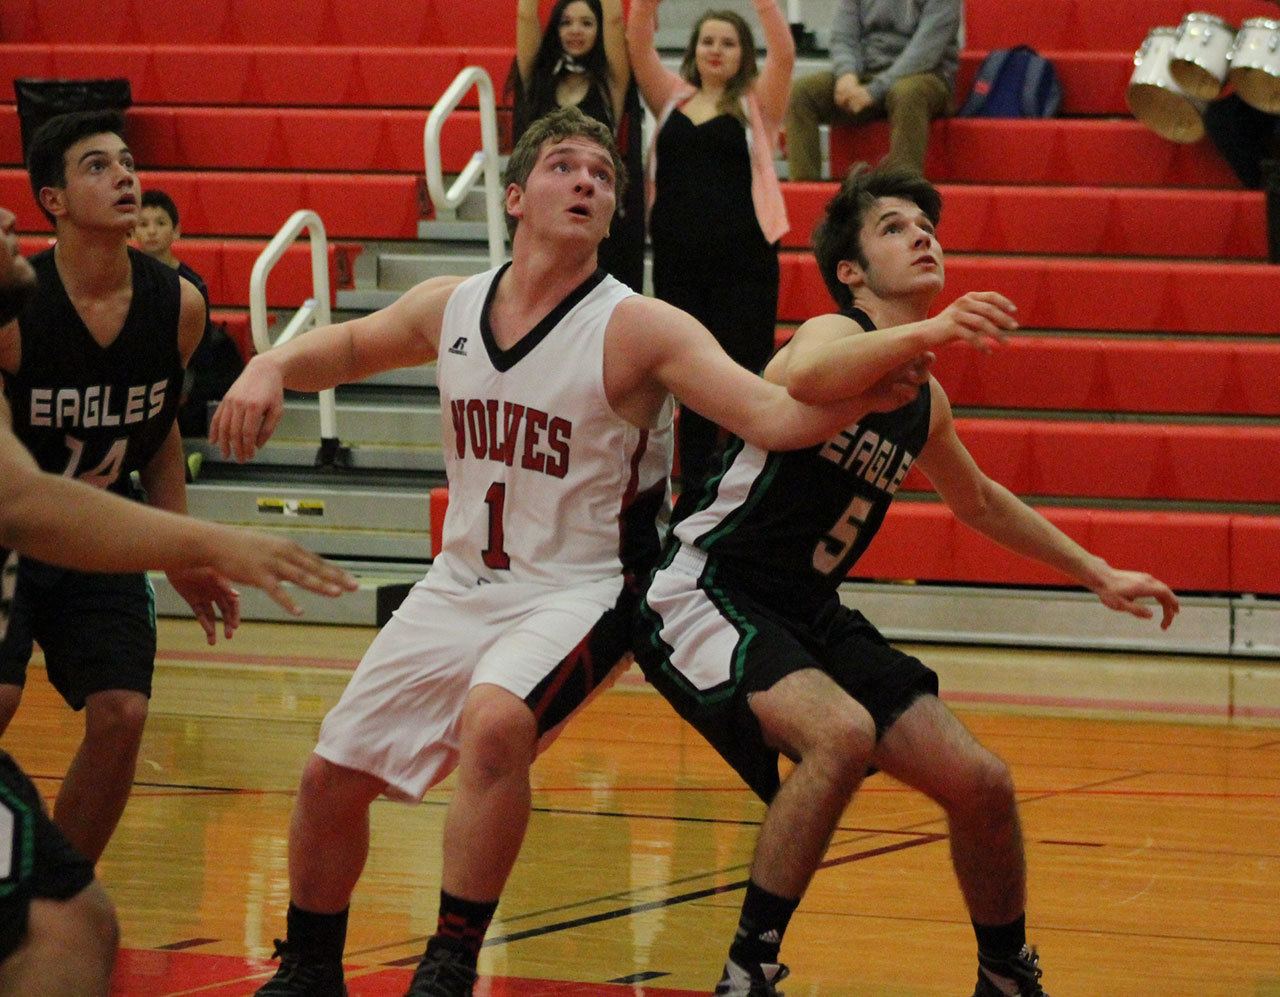 Coupeville’s Gabe Wynn (1) battles for rebounding position on a free throw with Klahowya’s Garett Betzing. (Photo by Jim Waller)